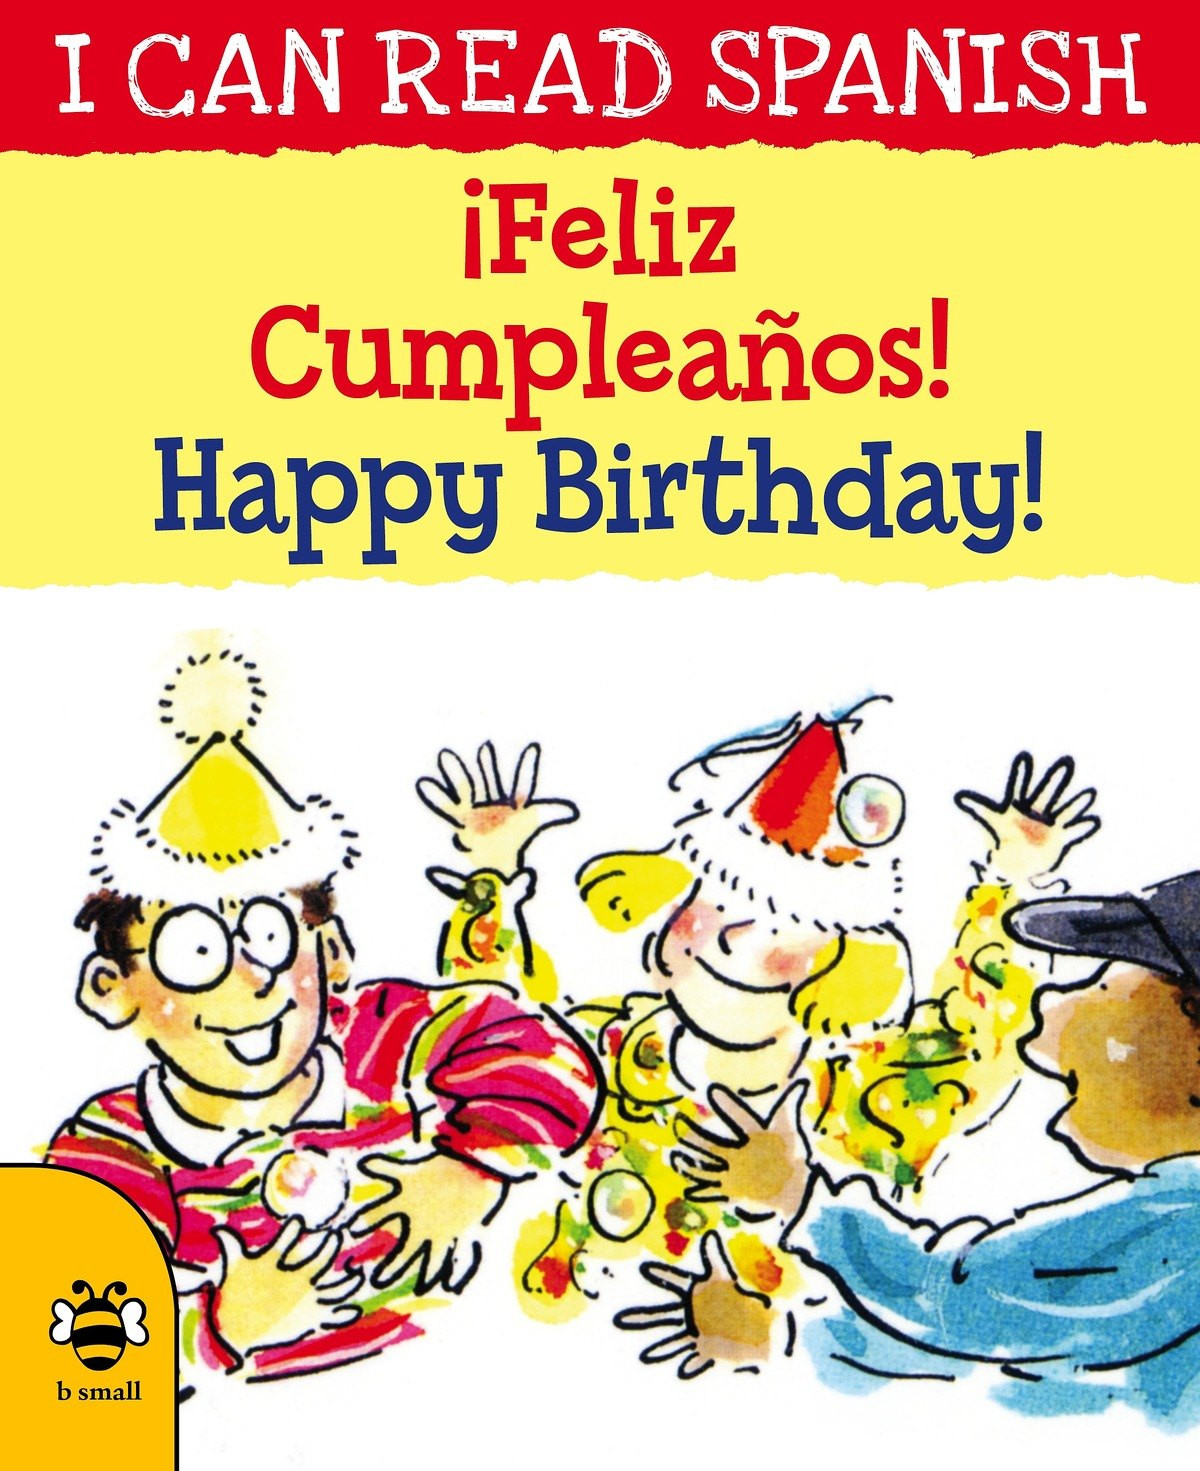 funny-birthday-greetings-in-spanish-the-cake-boutique